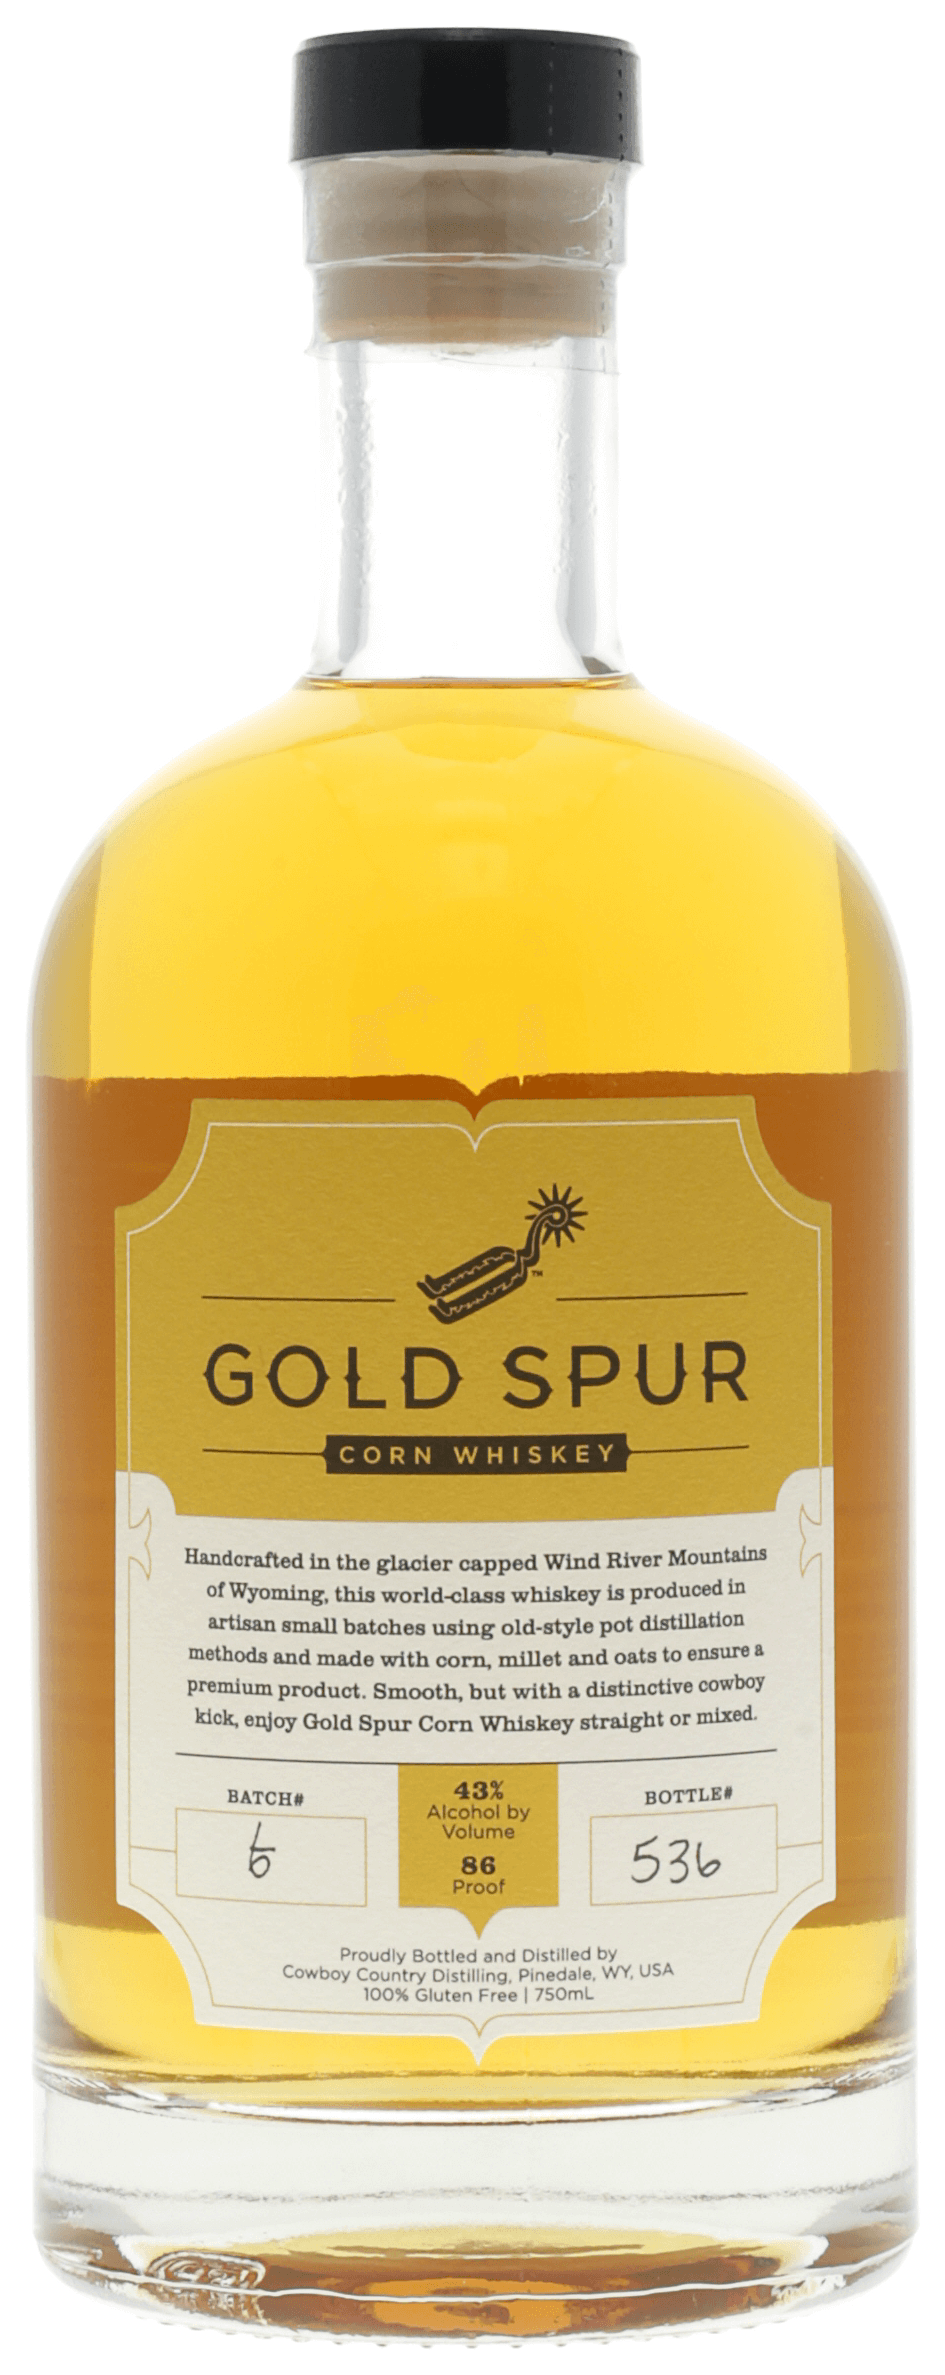 Gold Spur Corn Whiskey